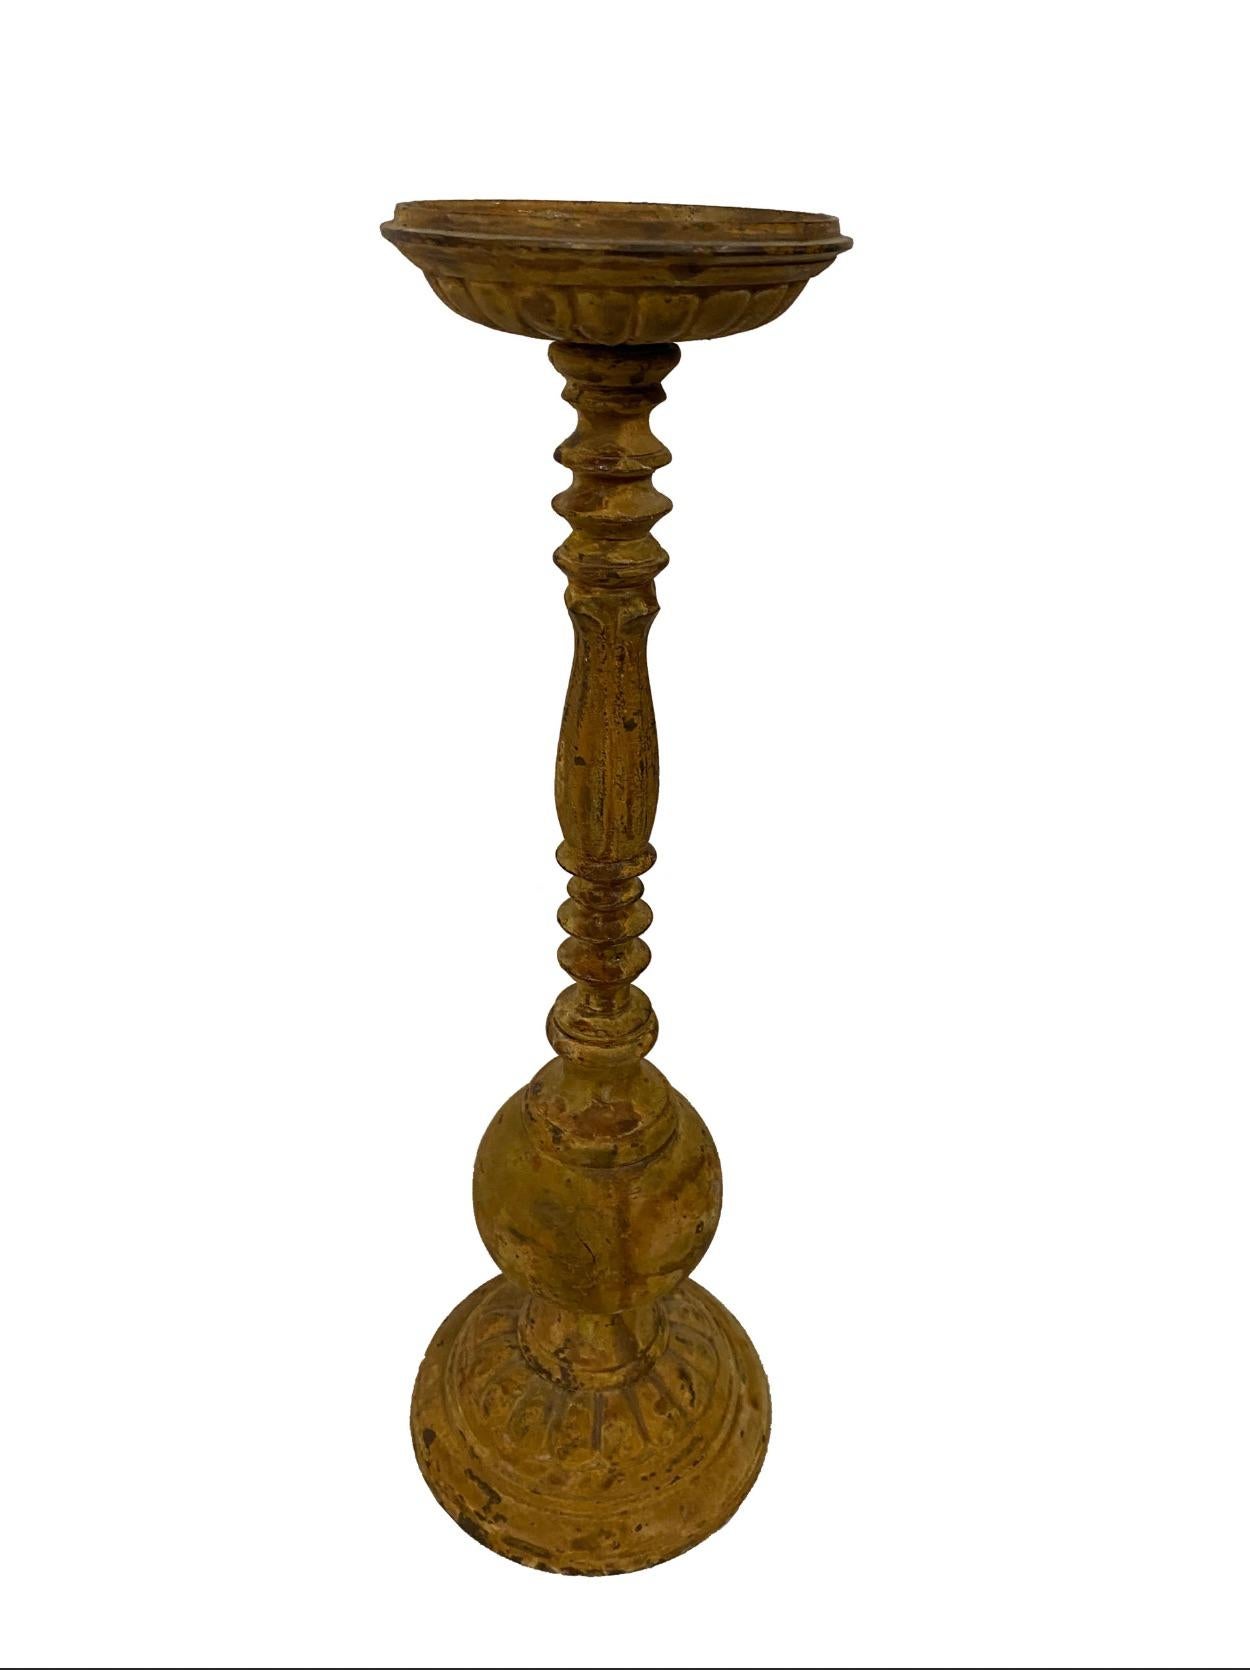 19th Century Rustic Painted Wood Candlestick